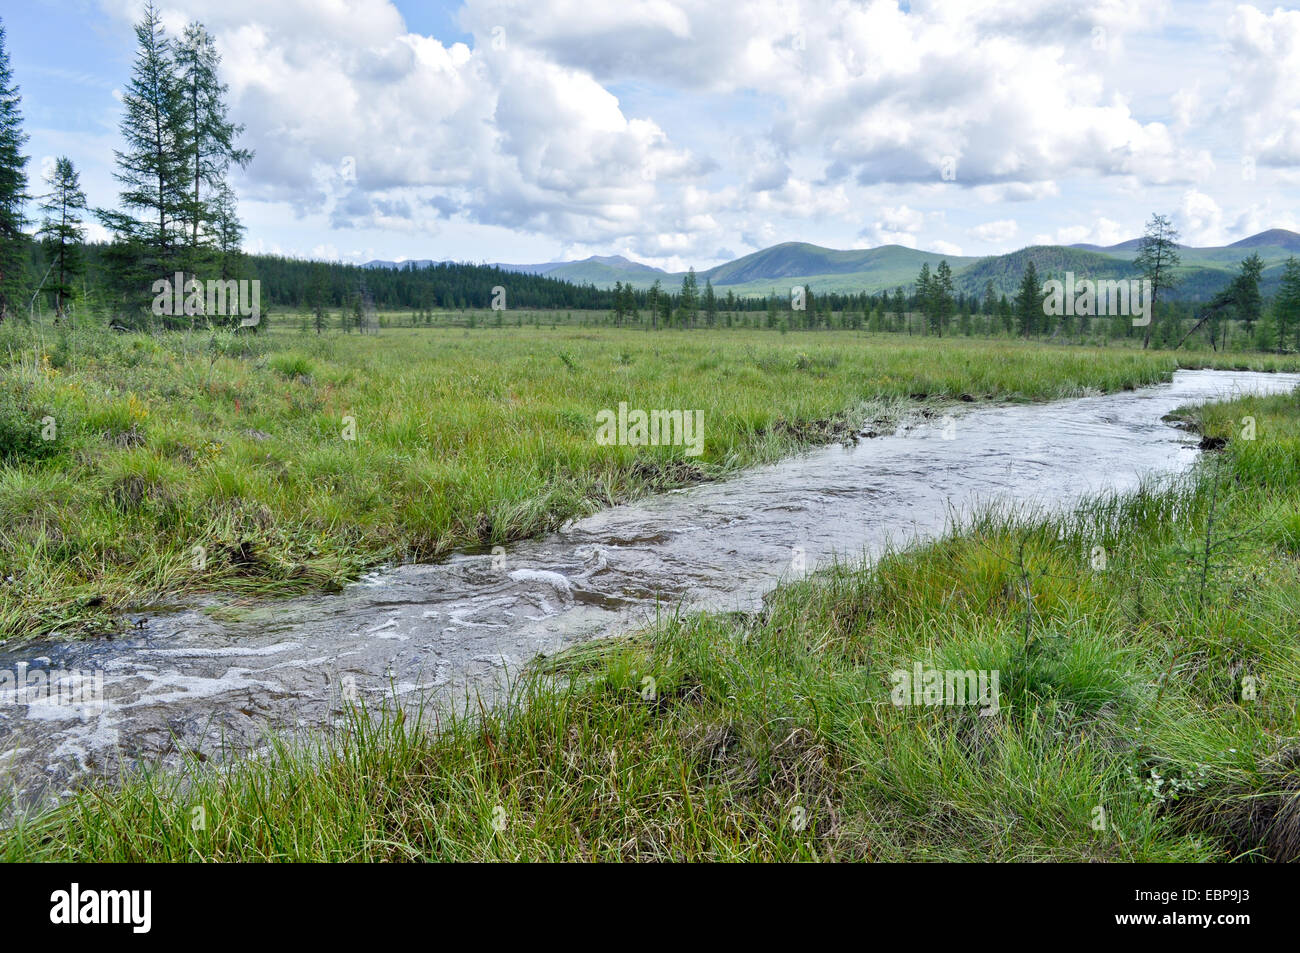 Water summer landscape surrounding the river Suntar in the Highlands of Oymyakon, Yakutia, Russia. Stock Photo